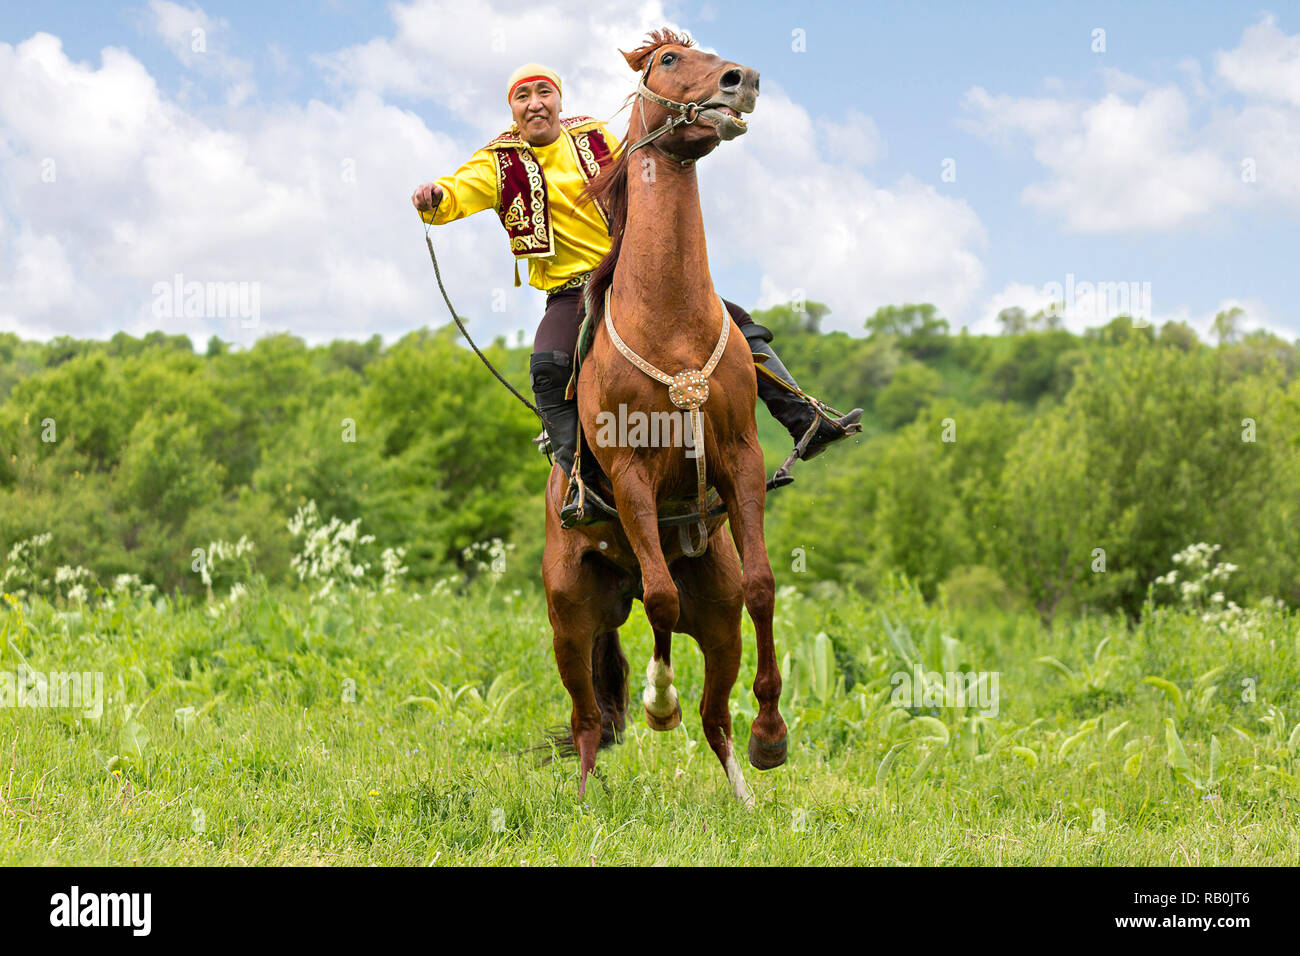 Kazakh man in national costumes rides and tries to get his horse reared up, in Almaty, Kazakhstan. Stock Photo